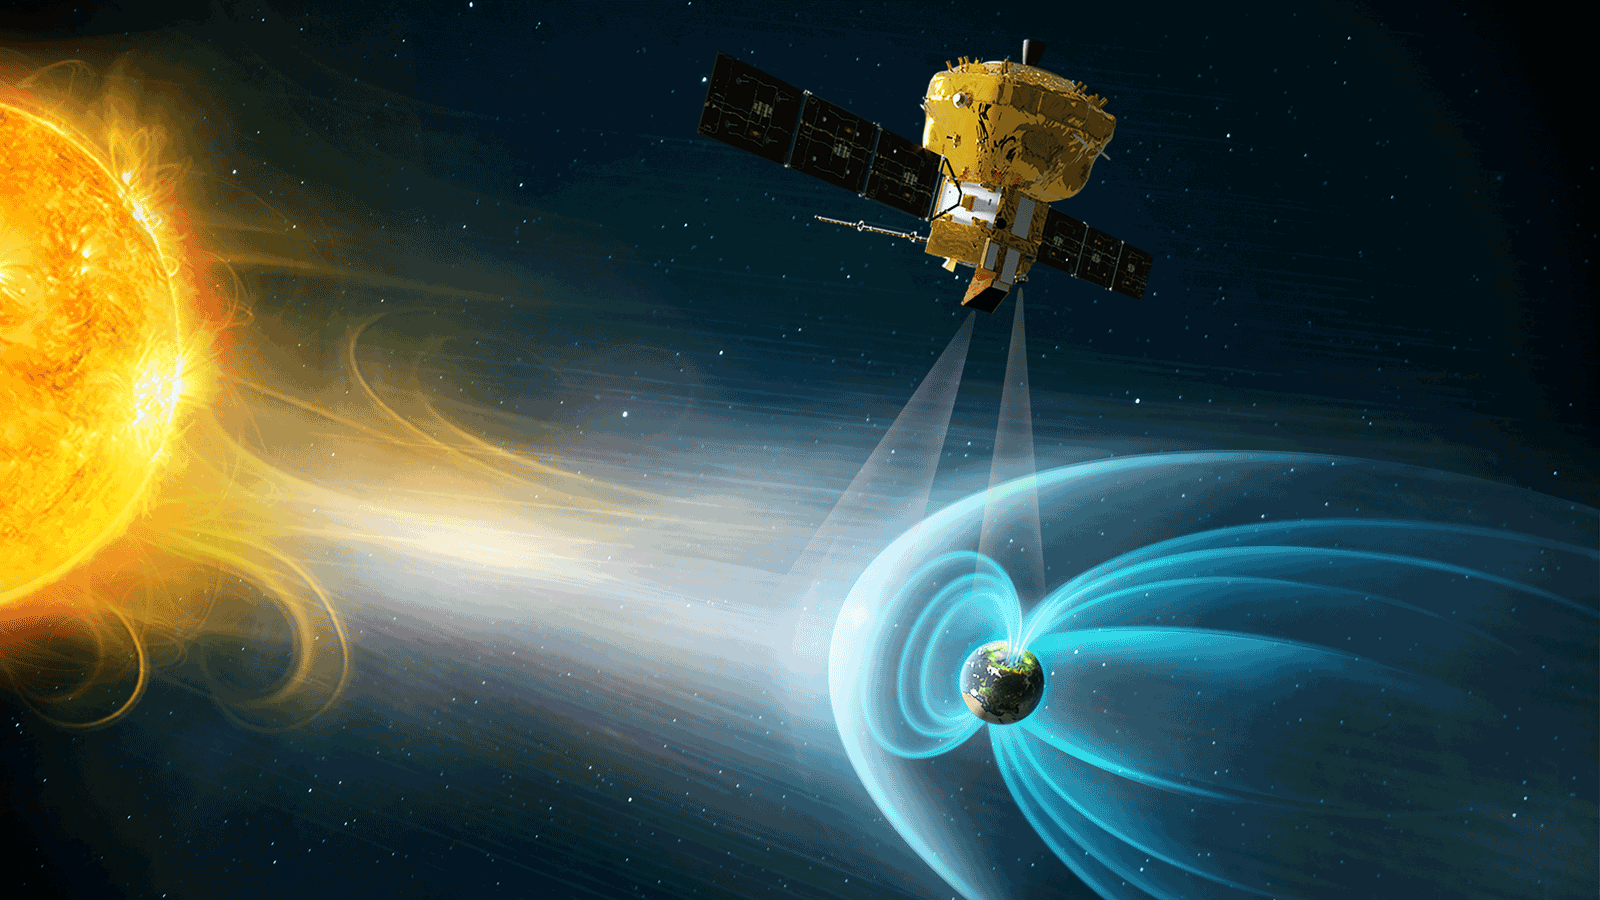 ESA’s solar wind mission is set to launch into space in late 2025